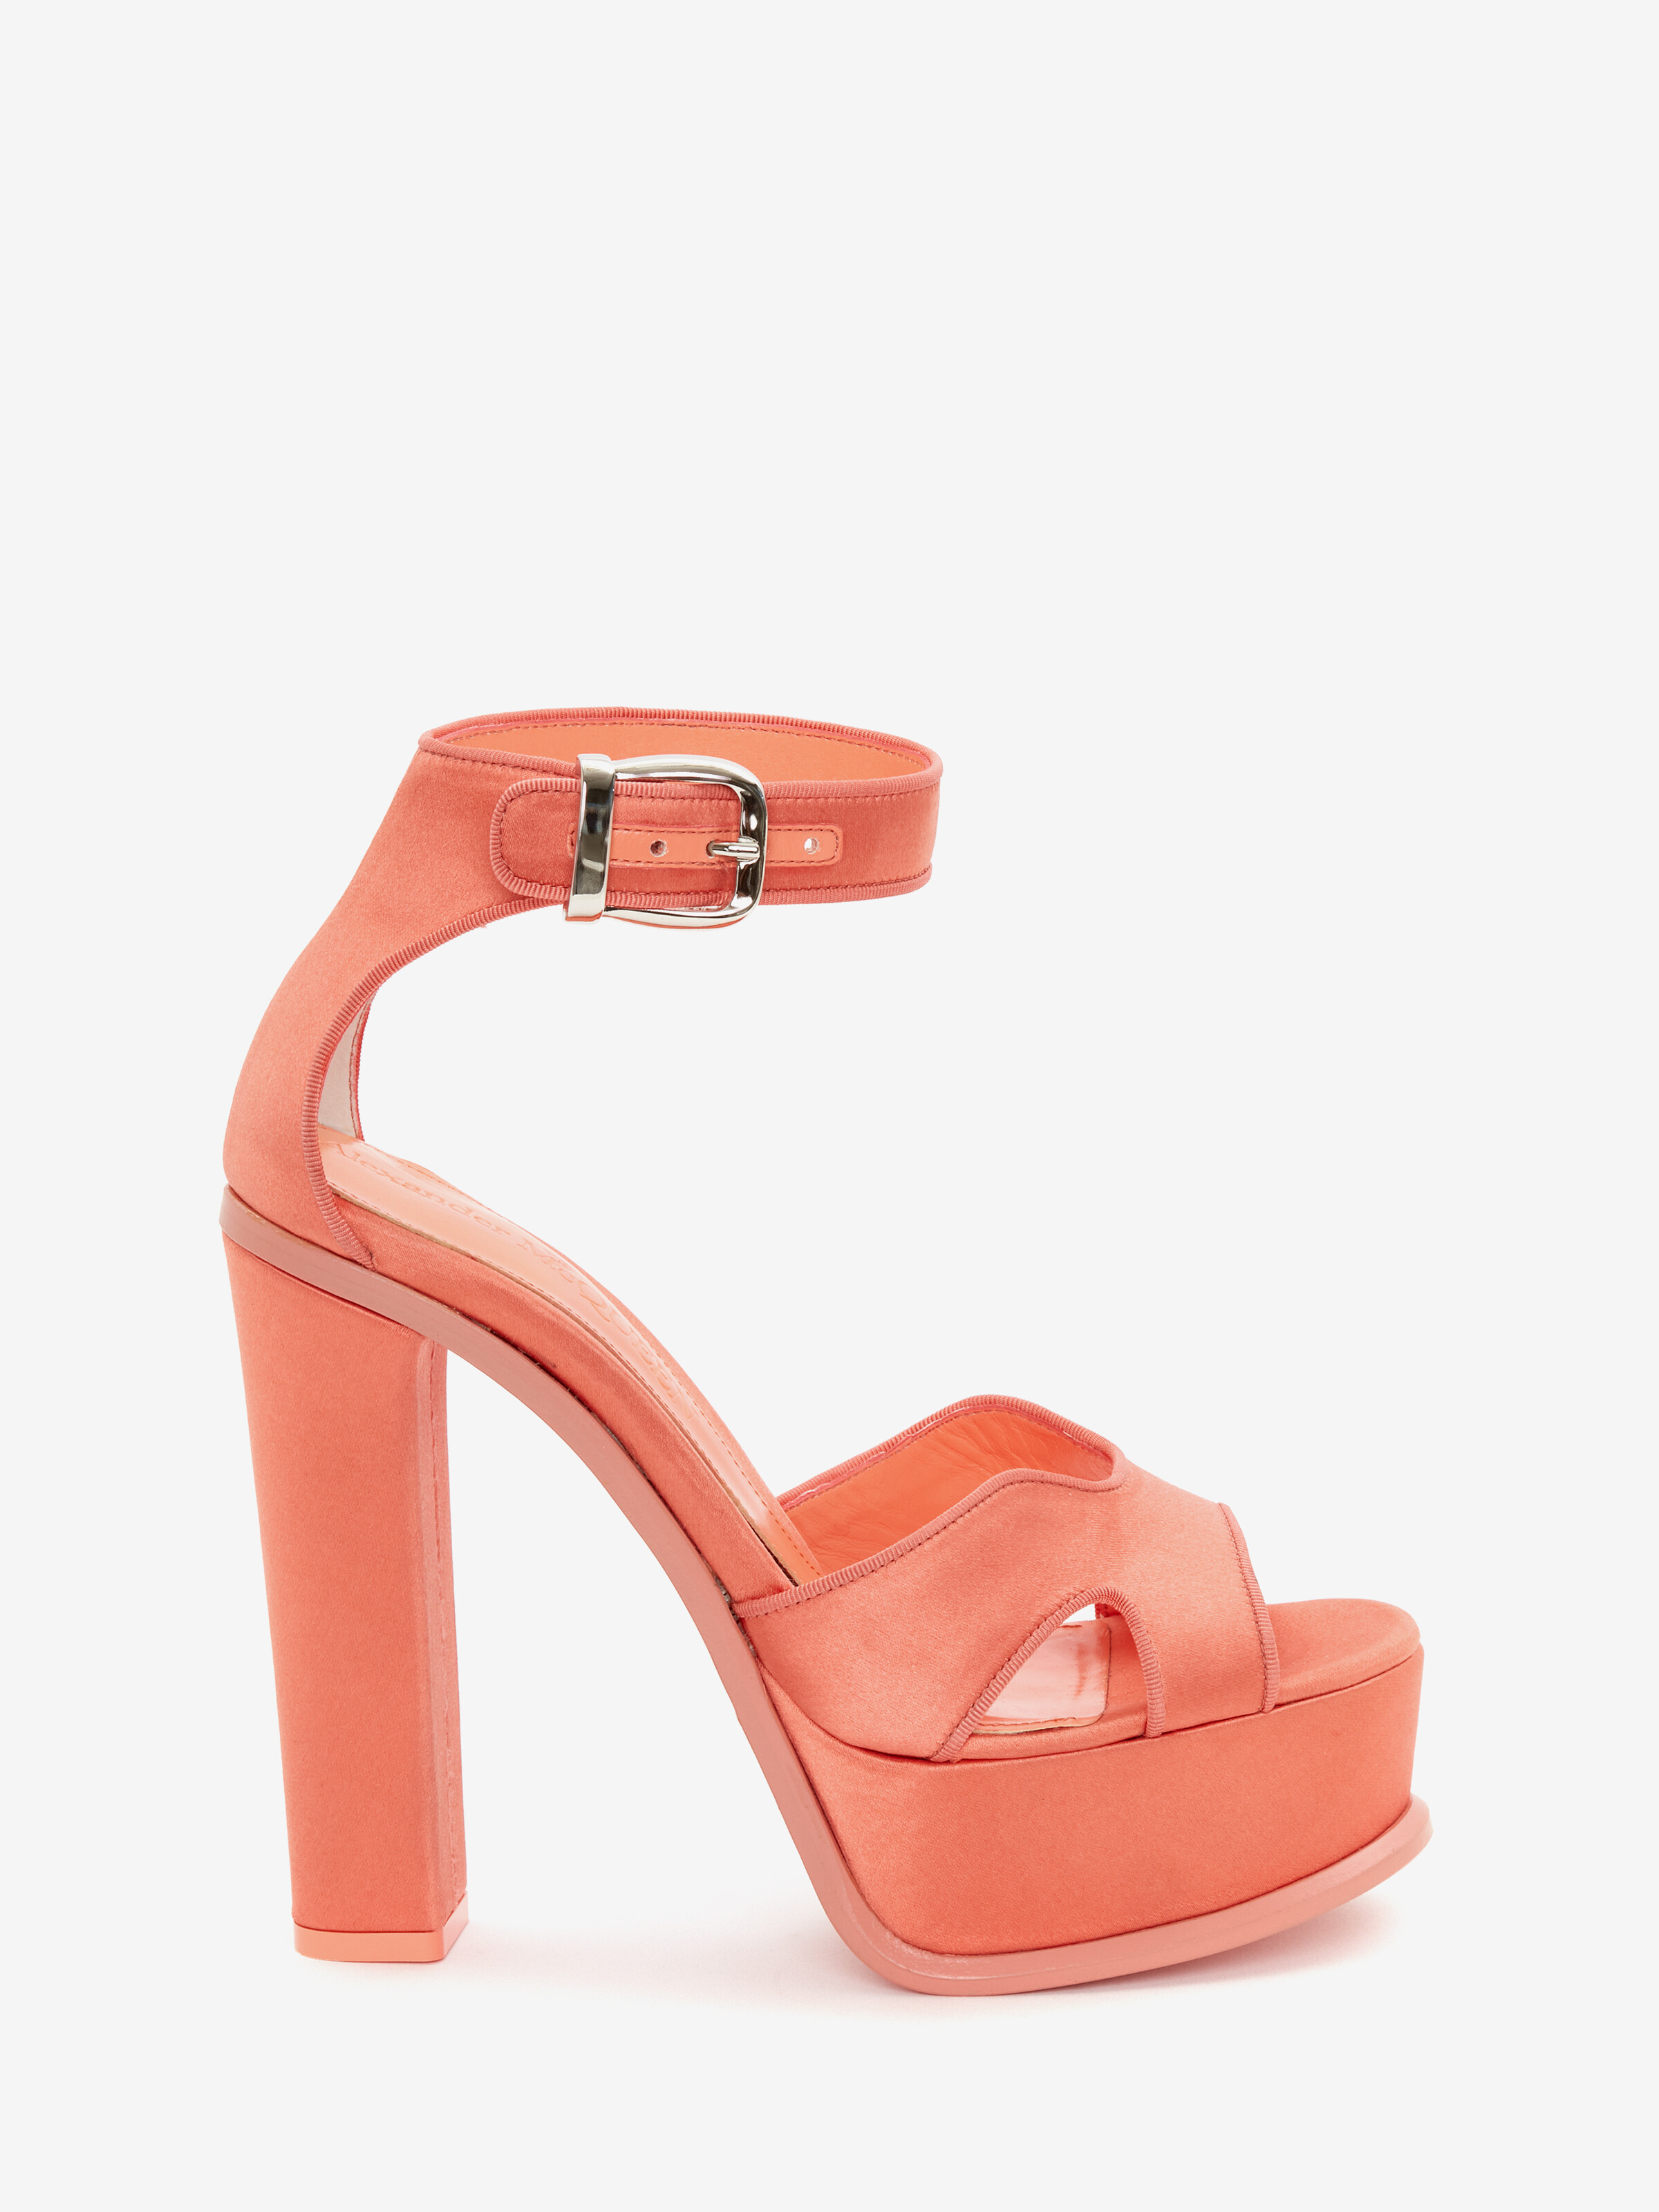 Heels for Women,Chunky High Heels Open Toe Block Heeled Sandals for Dress  Wedding Party Evening Office(8309-2,Coral Pink41) : Buy Online at Best  Price in KSA - Souq is now Amazon.sa: Fashion